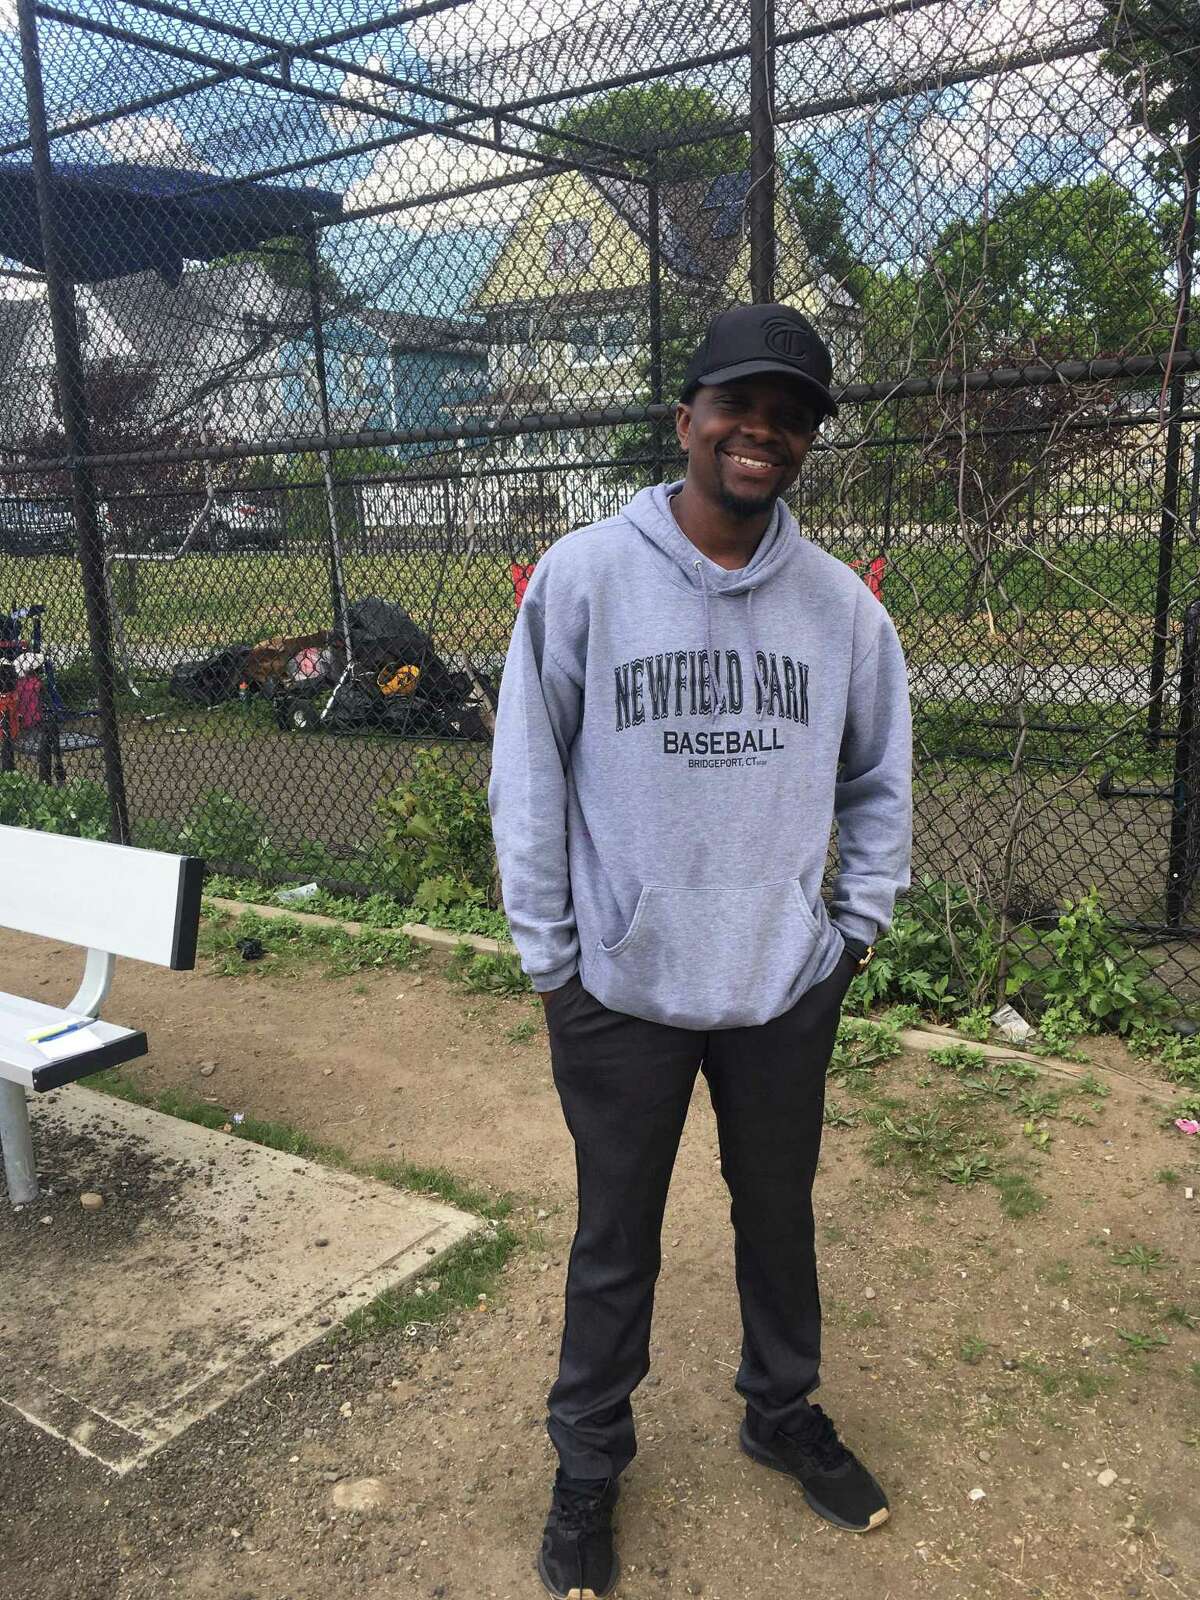 Wes Payne, a 37-year-old Bridgeport native and 13-year U.S. Navy veteran, is founder of the Newfield Park Youth Baseball Association.